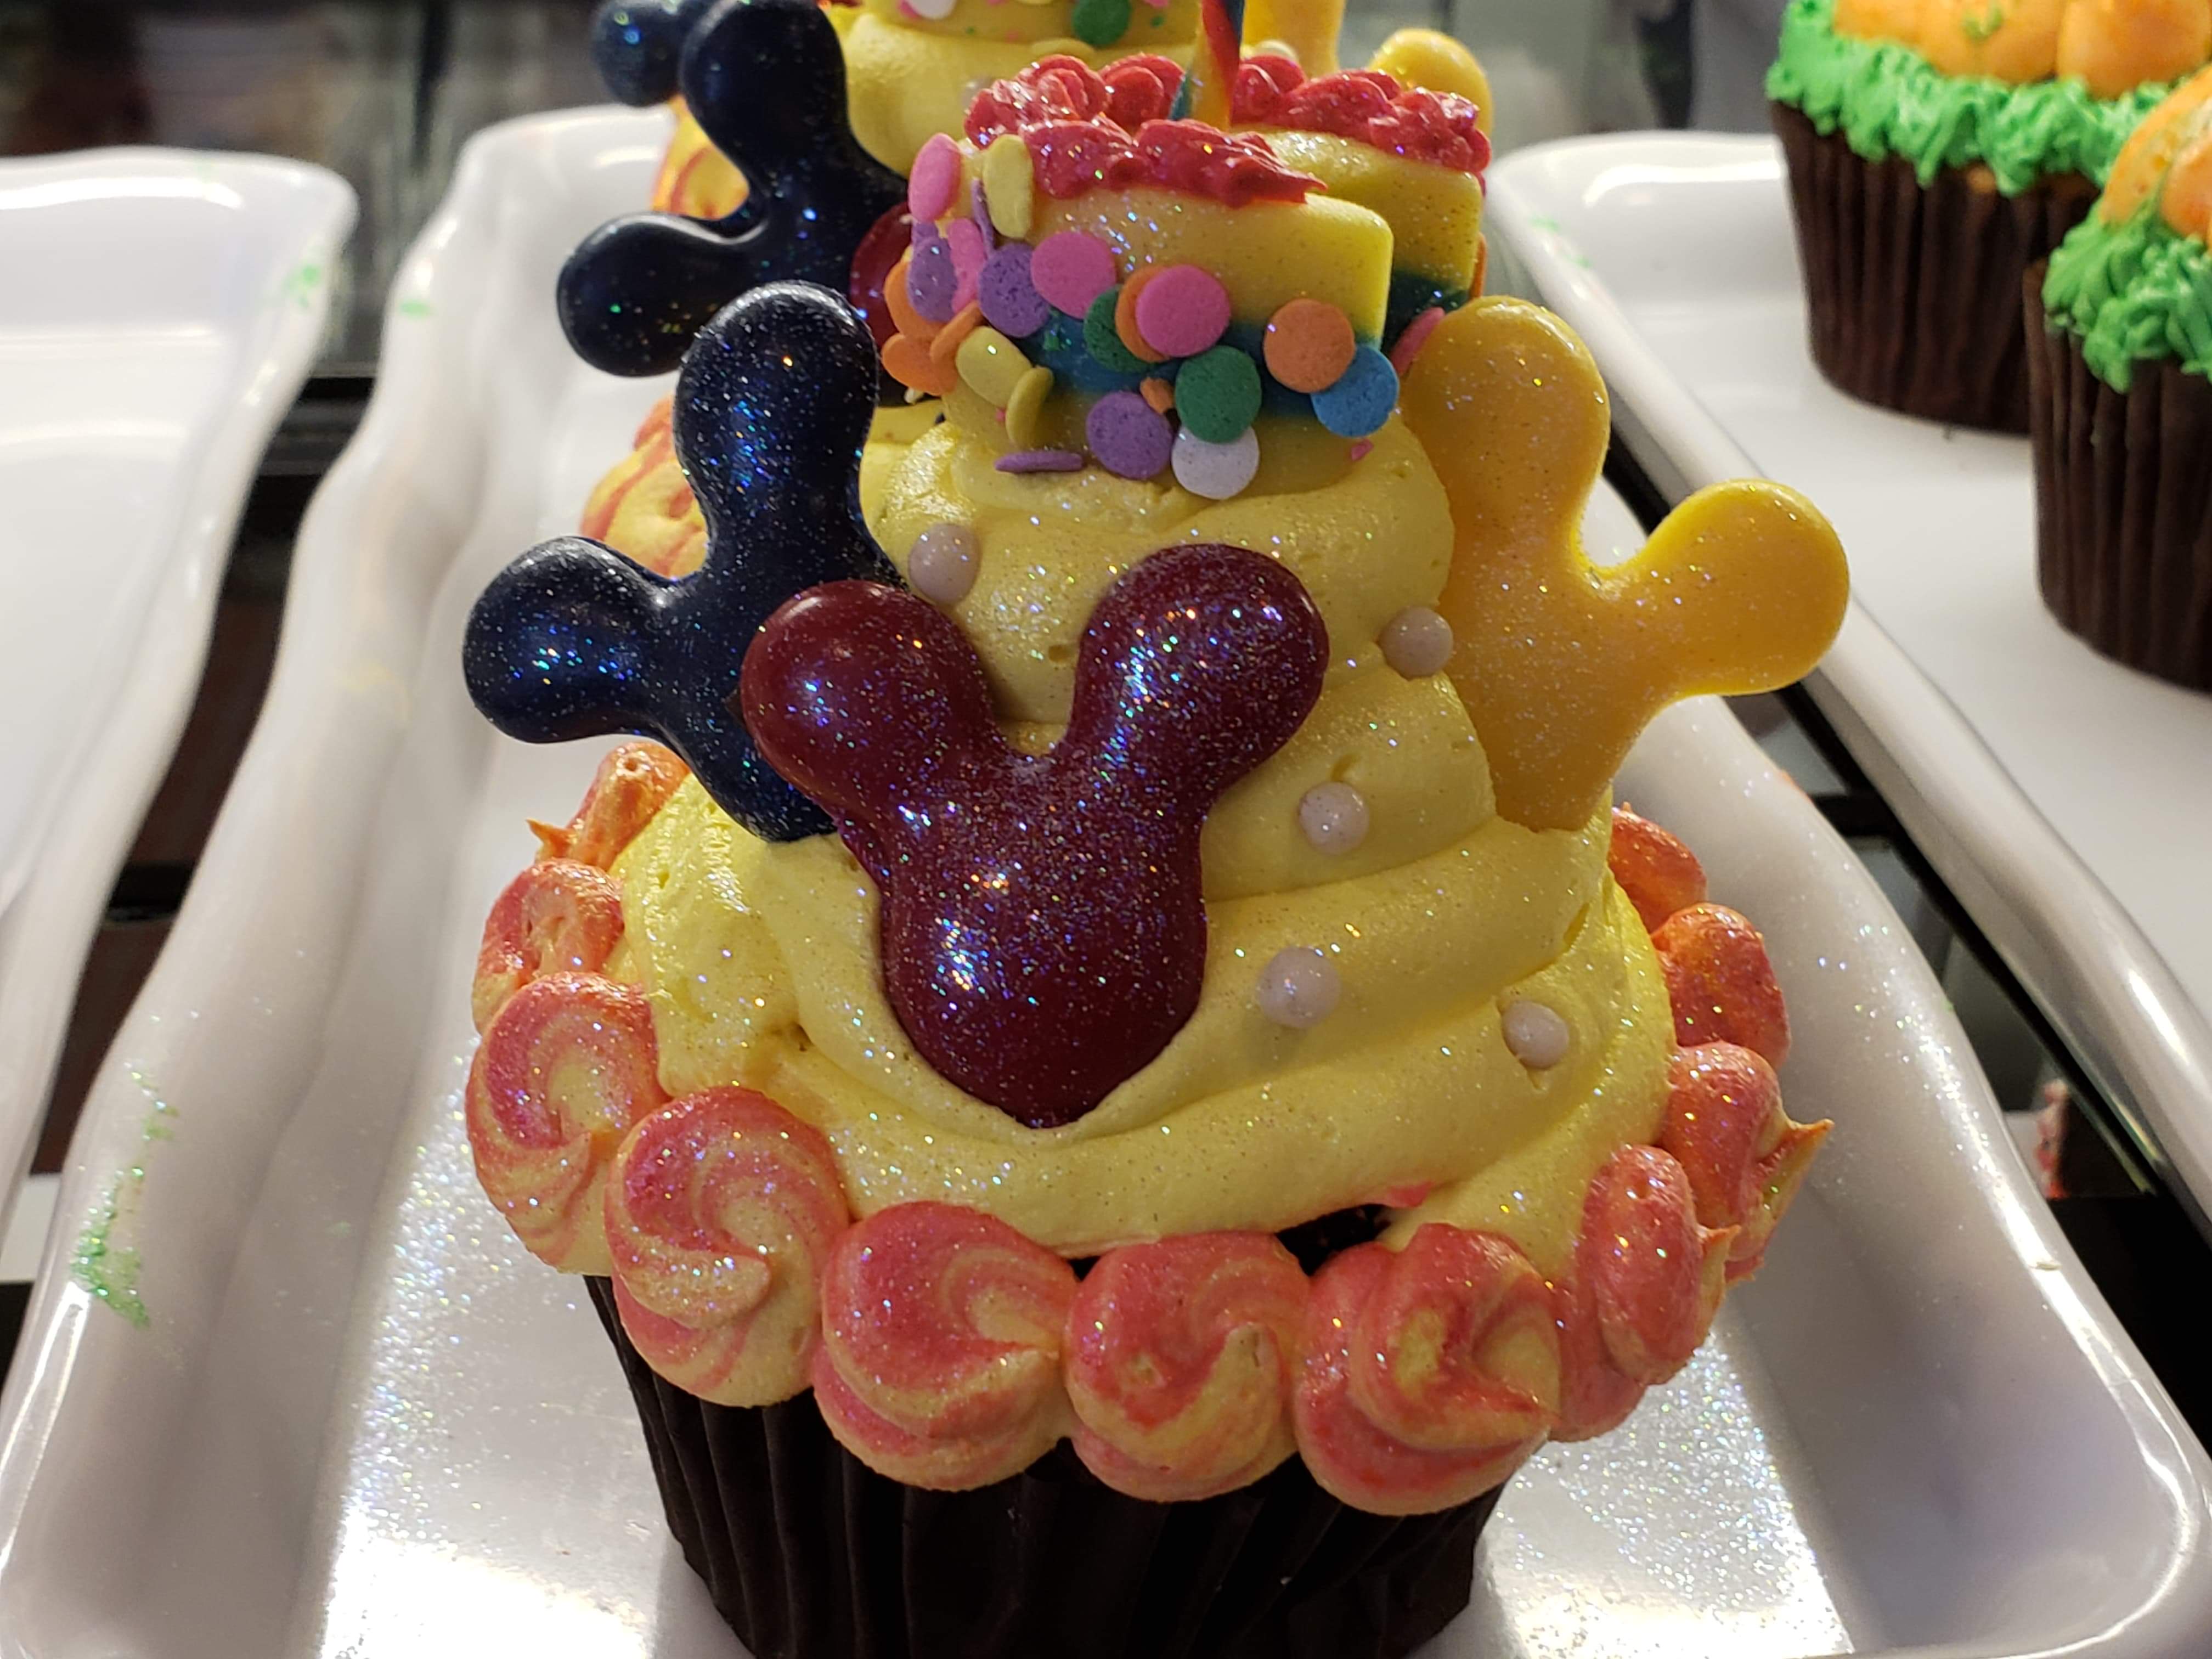 Contempo Cafe Celebrates Mickey’s Birthday With An Amazing Cupcake